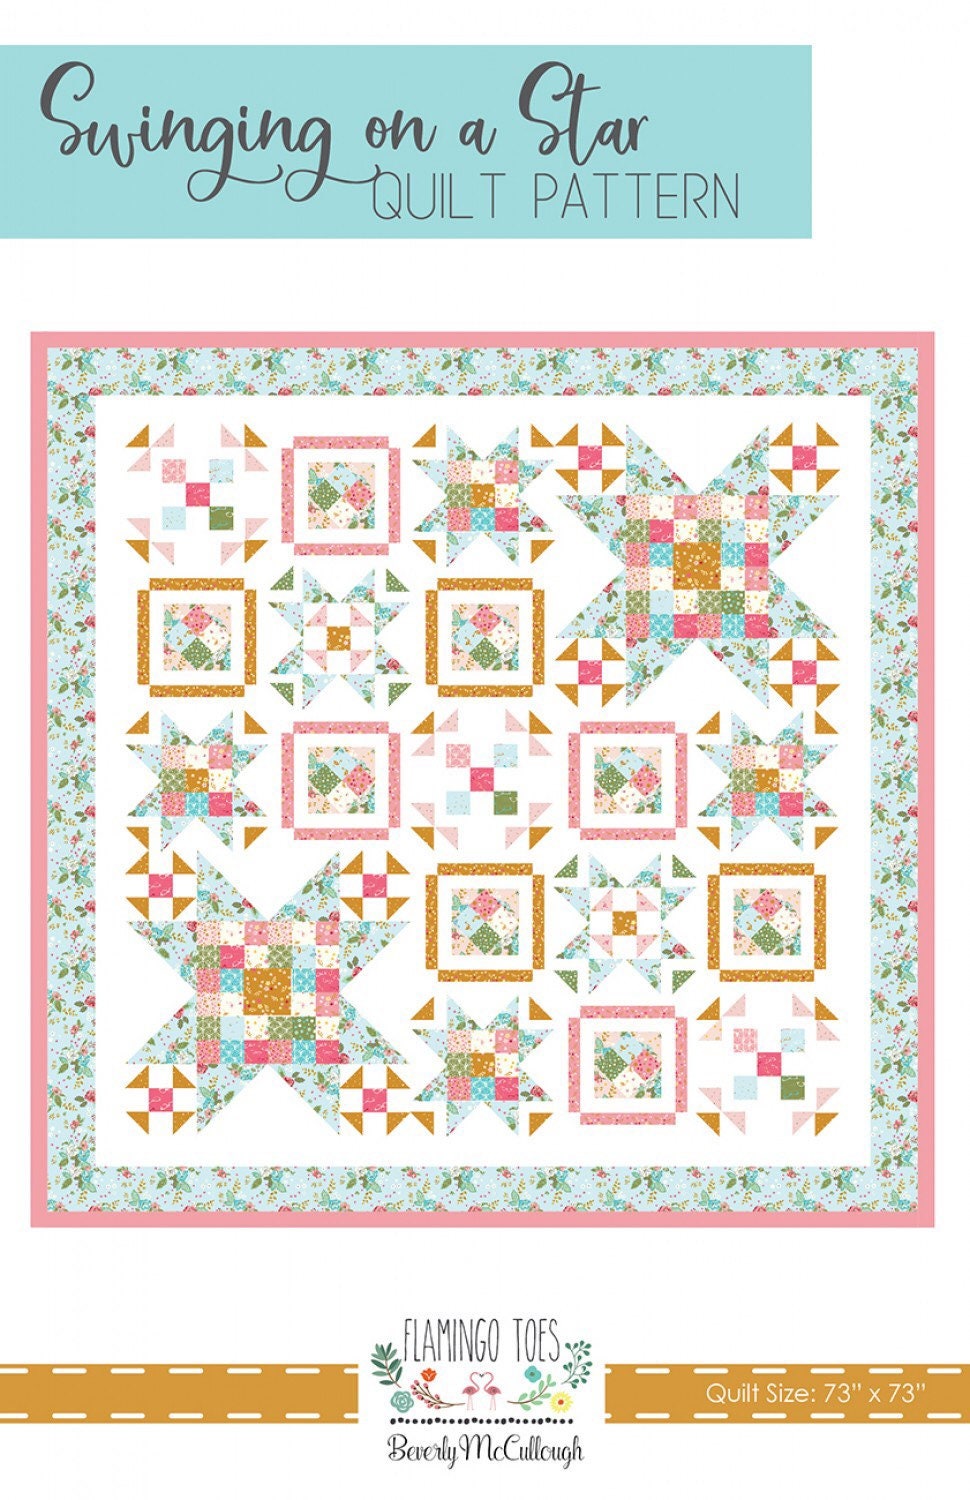 Swinging on a Star Quilt Pattern - Stardust Fabric - Beverly McCullough - Flamingo Toes - Fat Quarter Friendly - Finishes at 73” x 73”